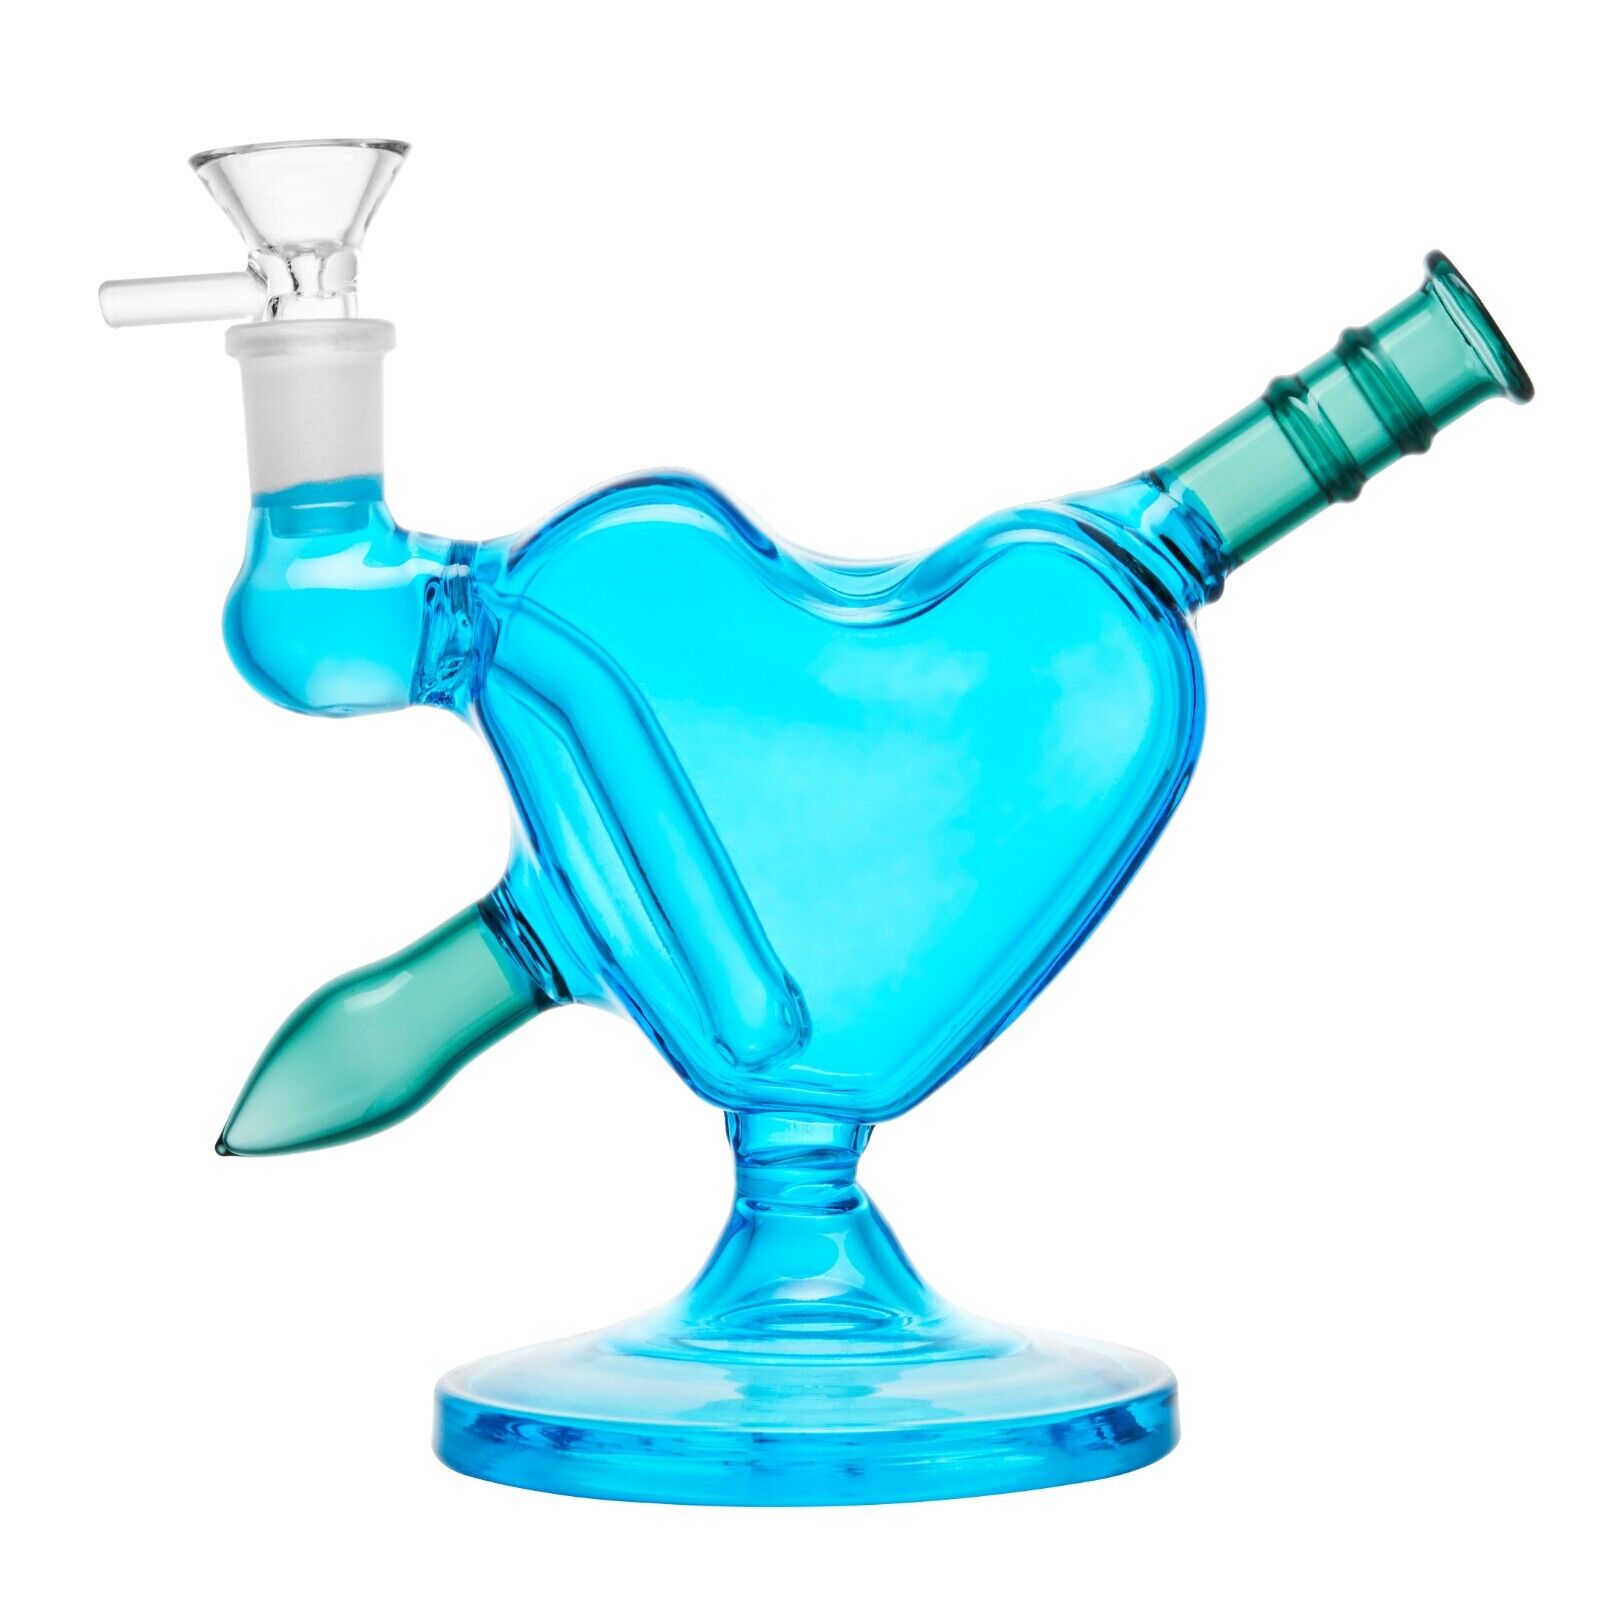 RORA 5 inch lovely Glass Bong Heart Shaped Smoking Hookahs 14mm Bowl Water Pipe